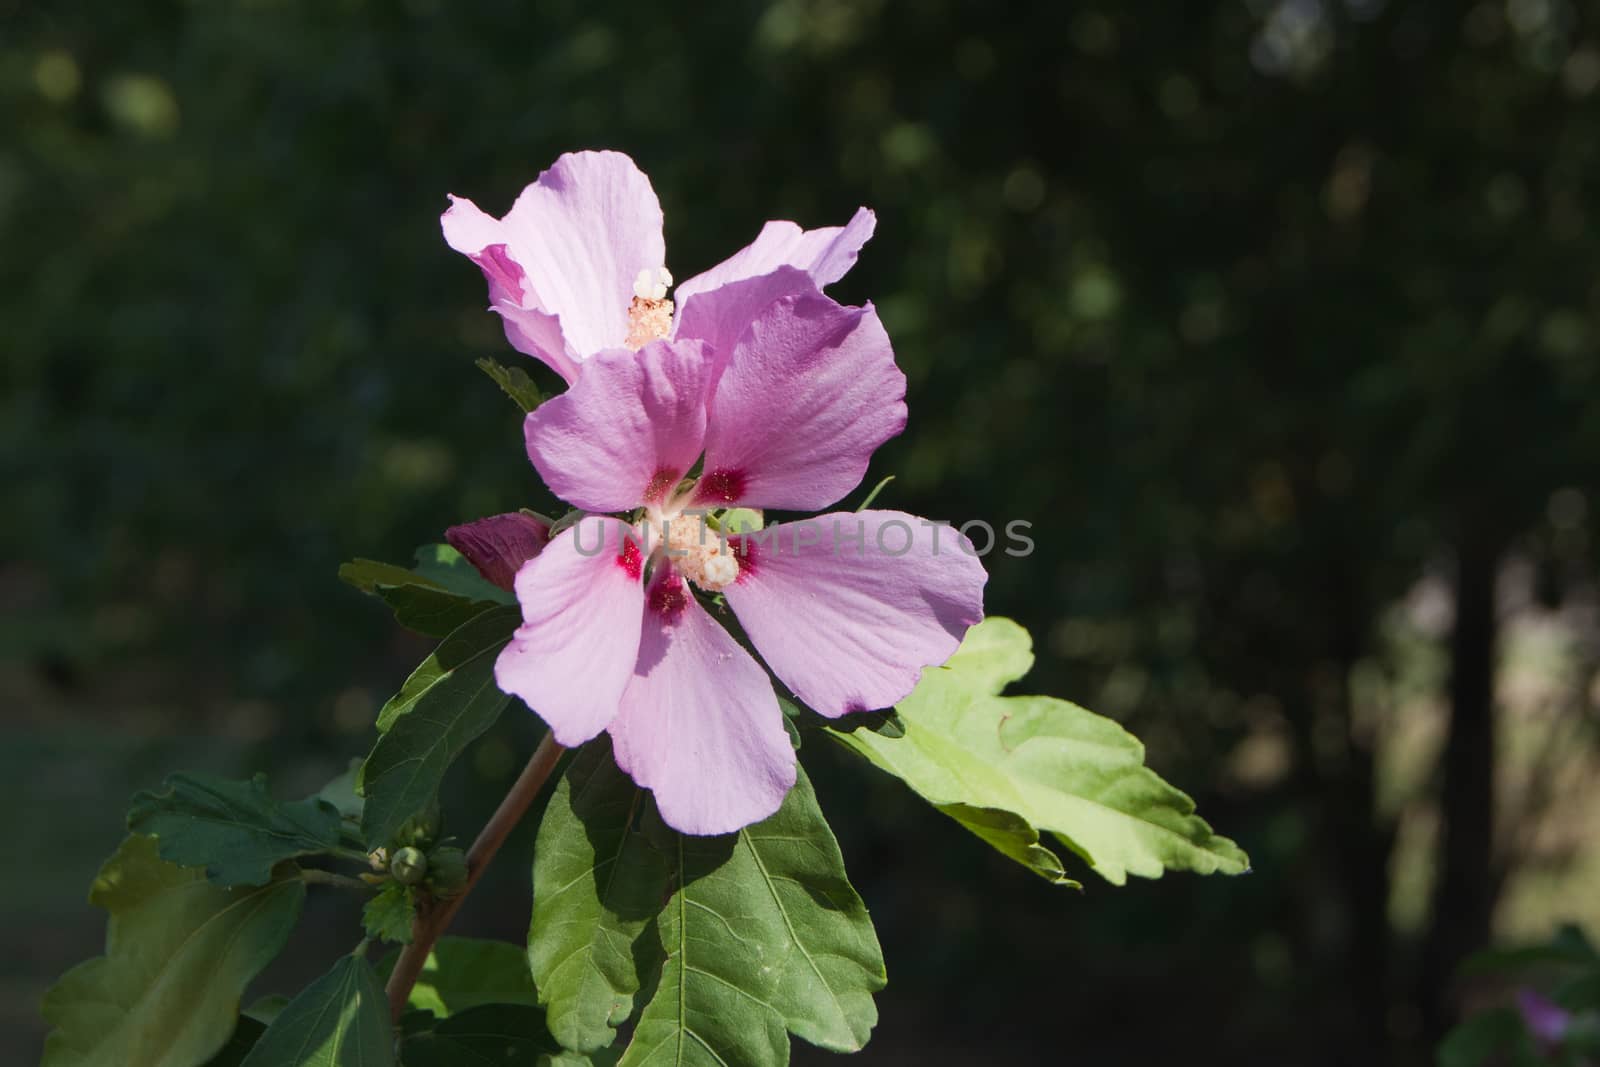 The bush mallow (Hibiscus syriacus) in the garden.